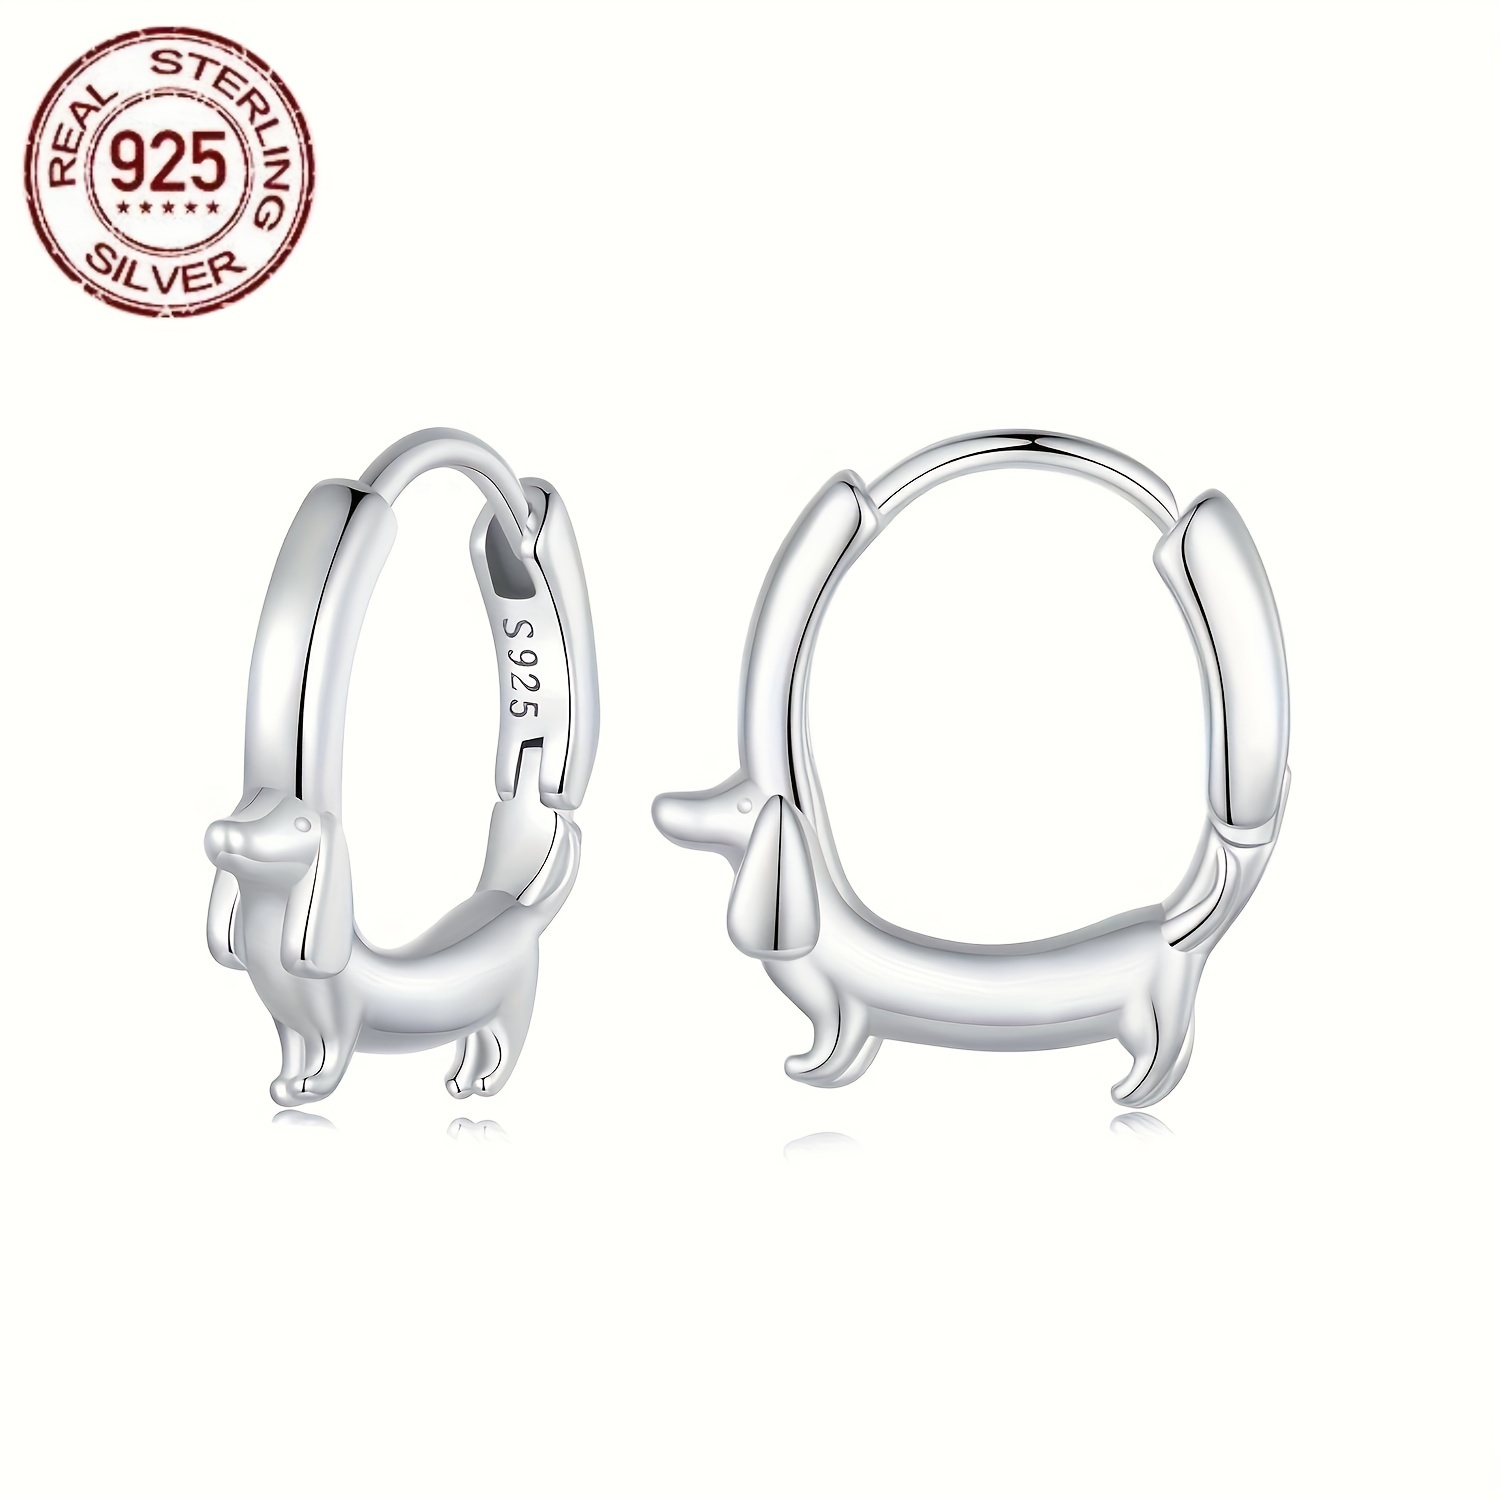 

Exquisite Dachshund Dog Design Hoop Earrings 925 Sterling Silver Hypoallergenic Jewelry Elegant Leisure Style For Women Daily Casual